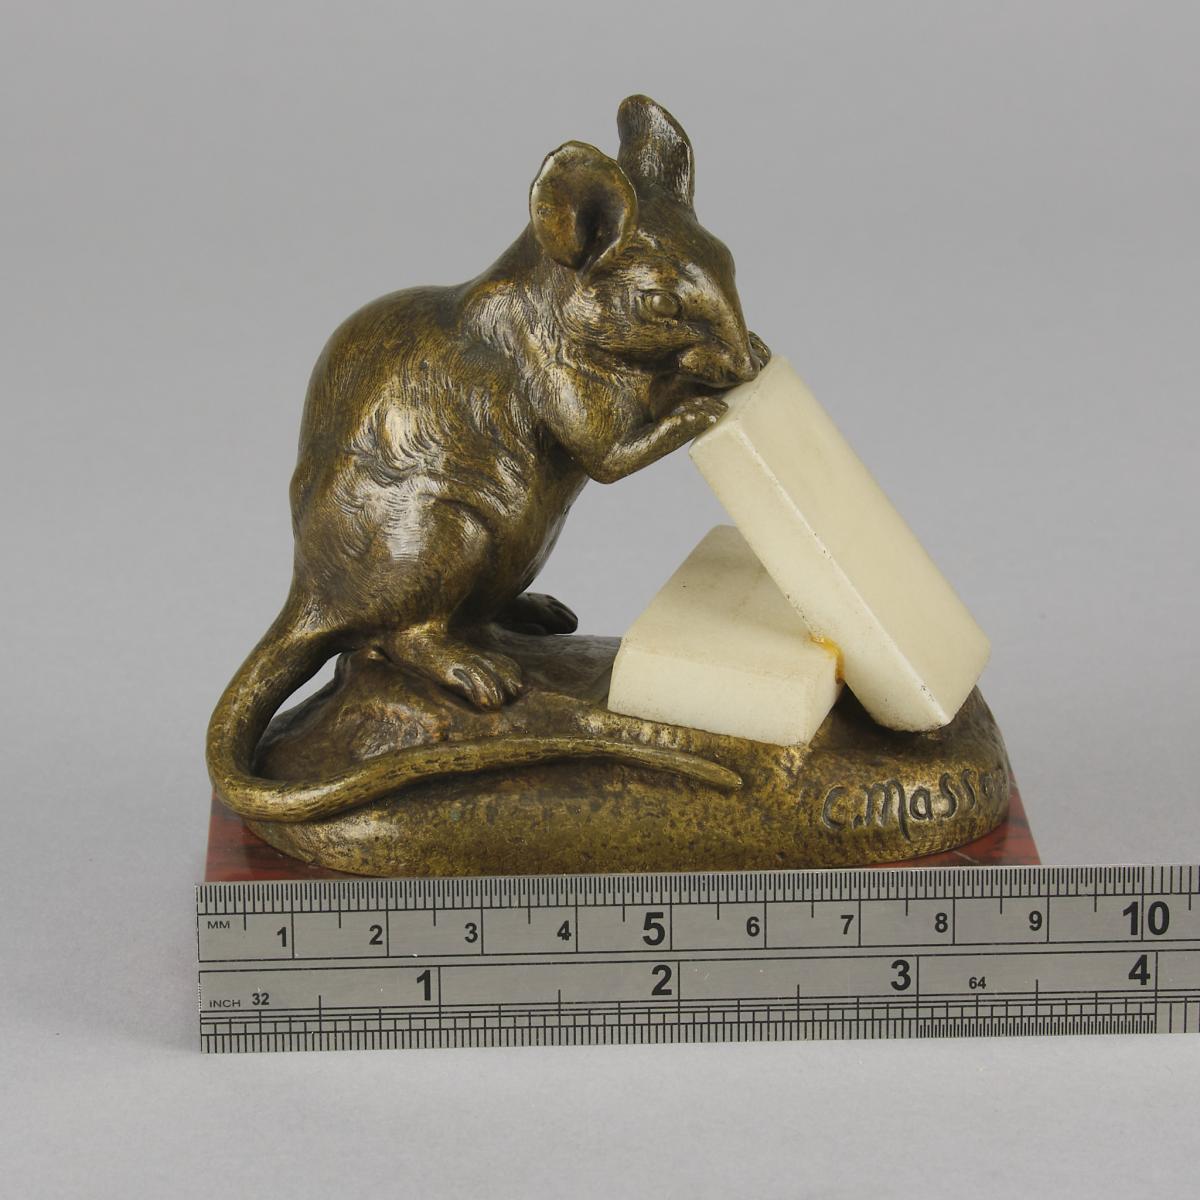 Early 20th Century French Animalier Bronze entitled "Mouse And Cheese" by Clovis Masson